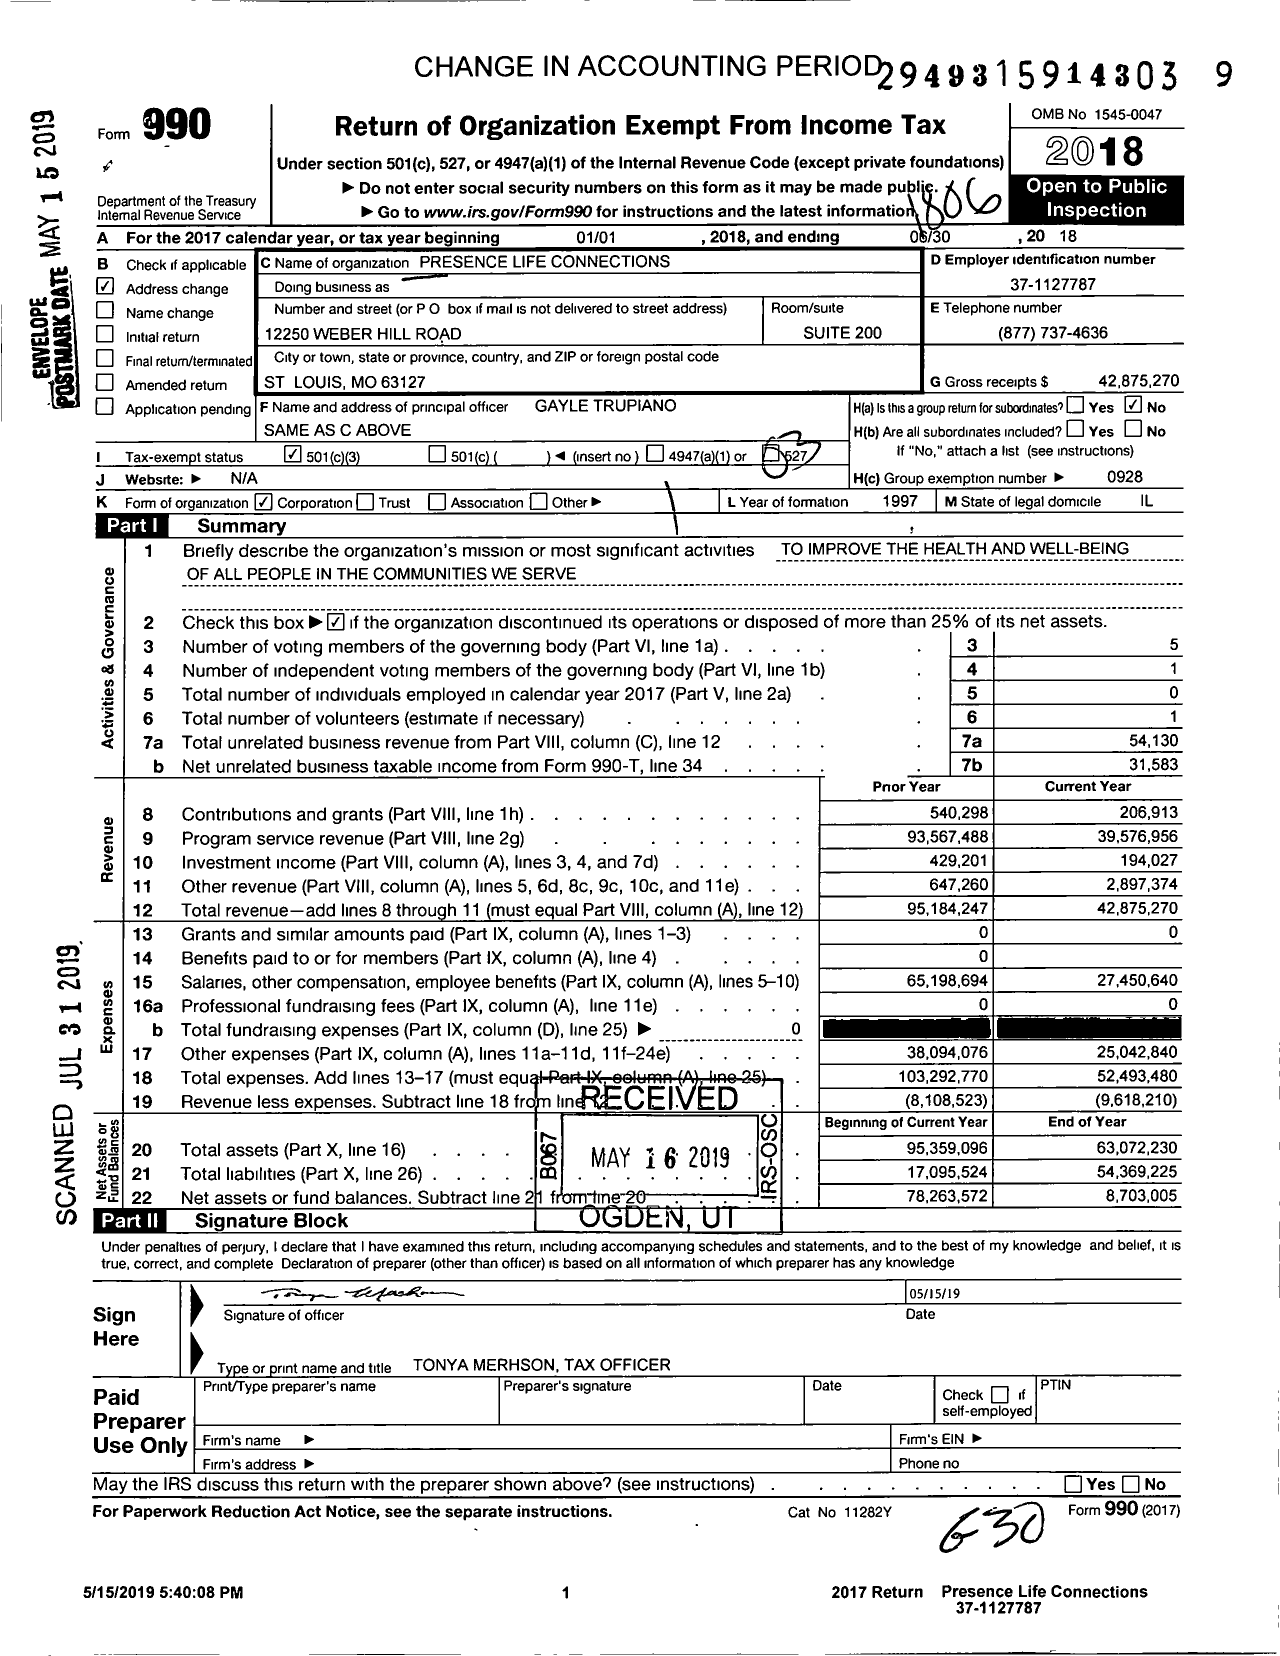 Image of first page of 2017 Form 990 for Presence Life Connections